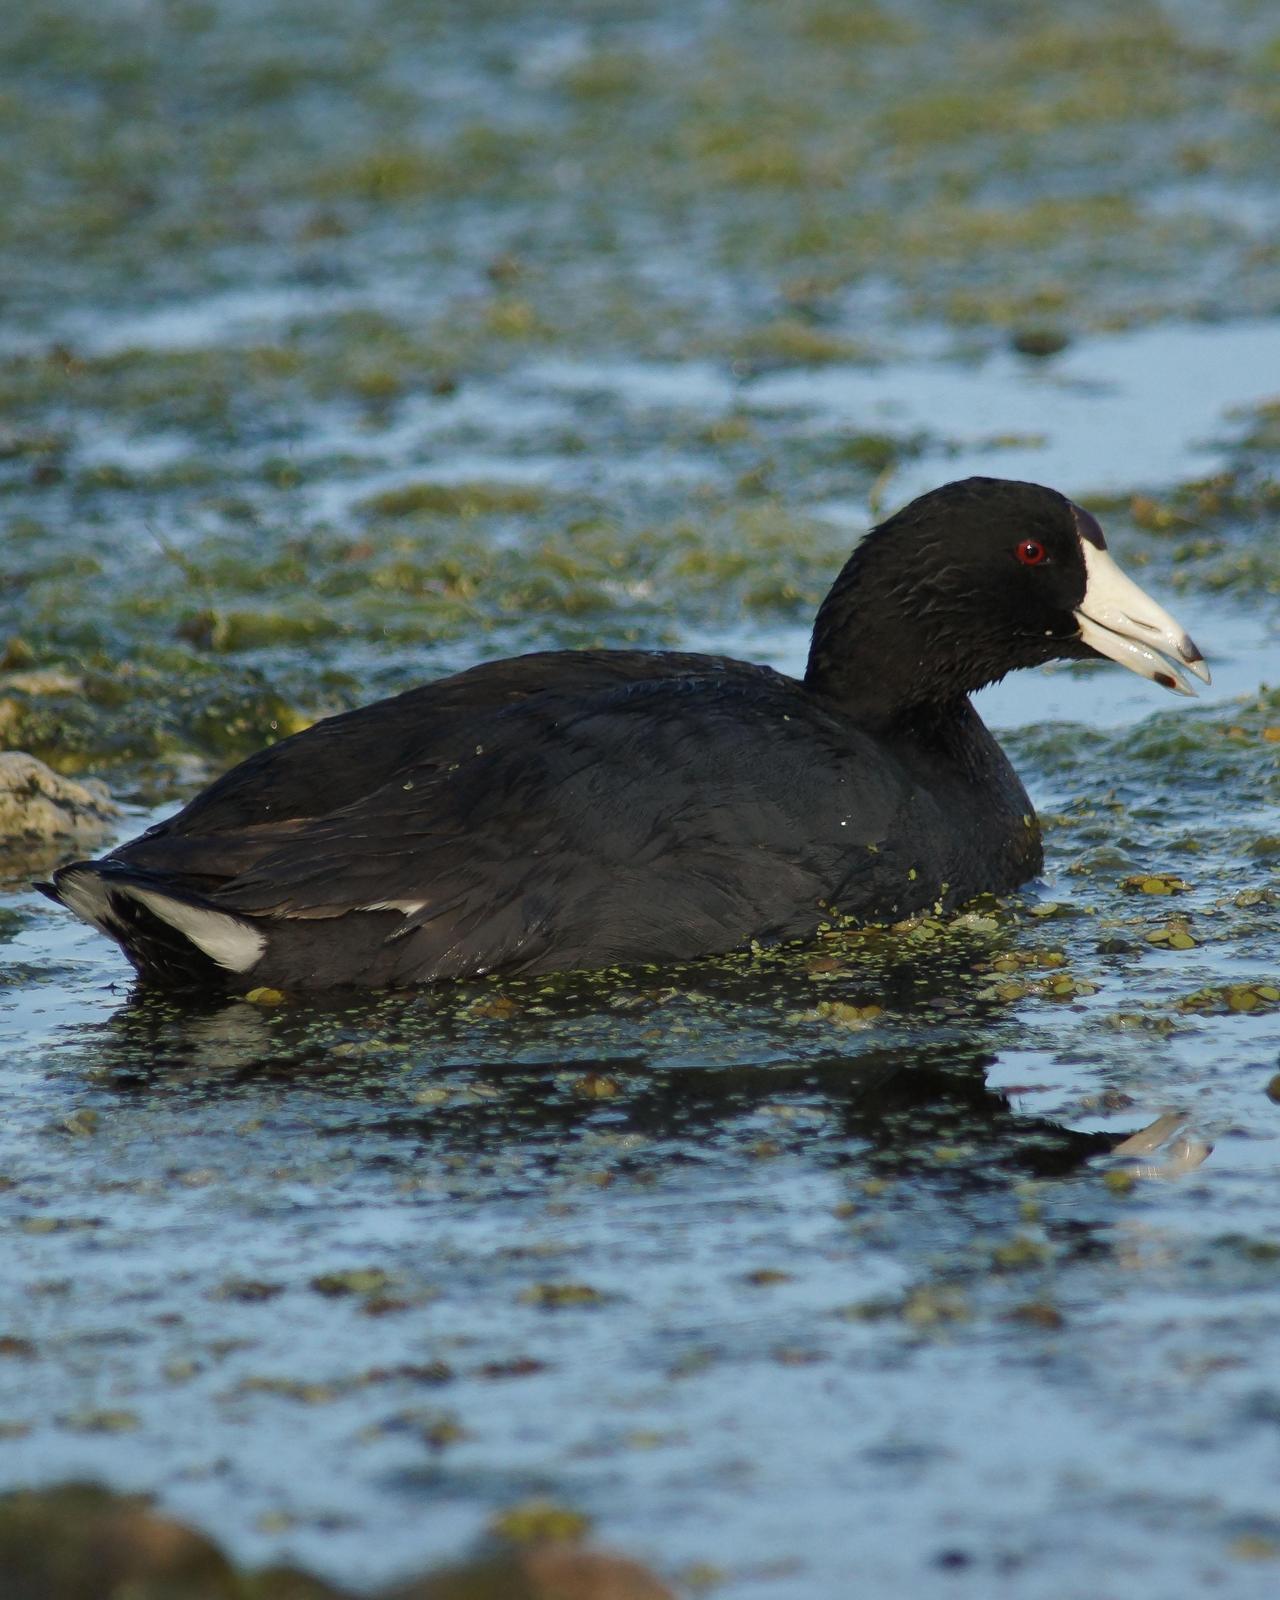 American Coot Photo by Steve Percival